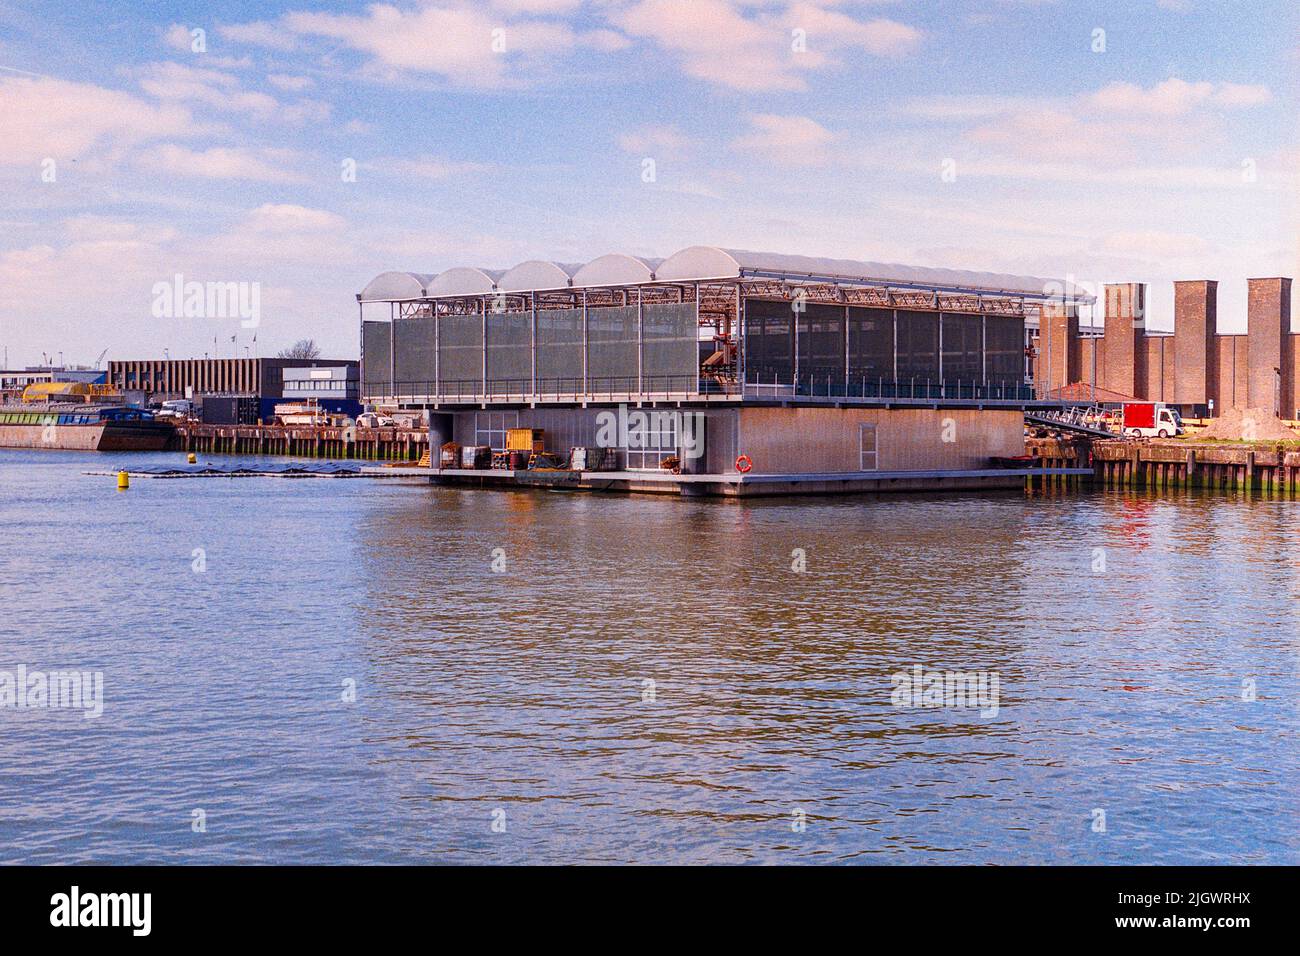 Rotterdam, Netherlands. The innovative, agricultural project: 'Floating Farm', produces diary and milk products on a structure, floating in de middle of an harbor. Stock Photo